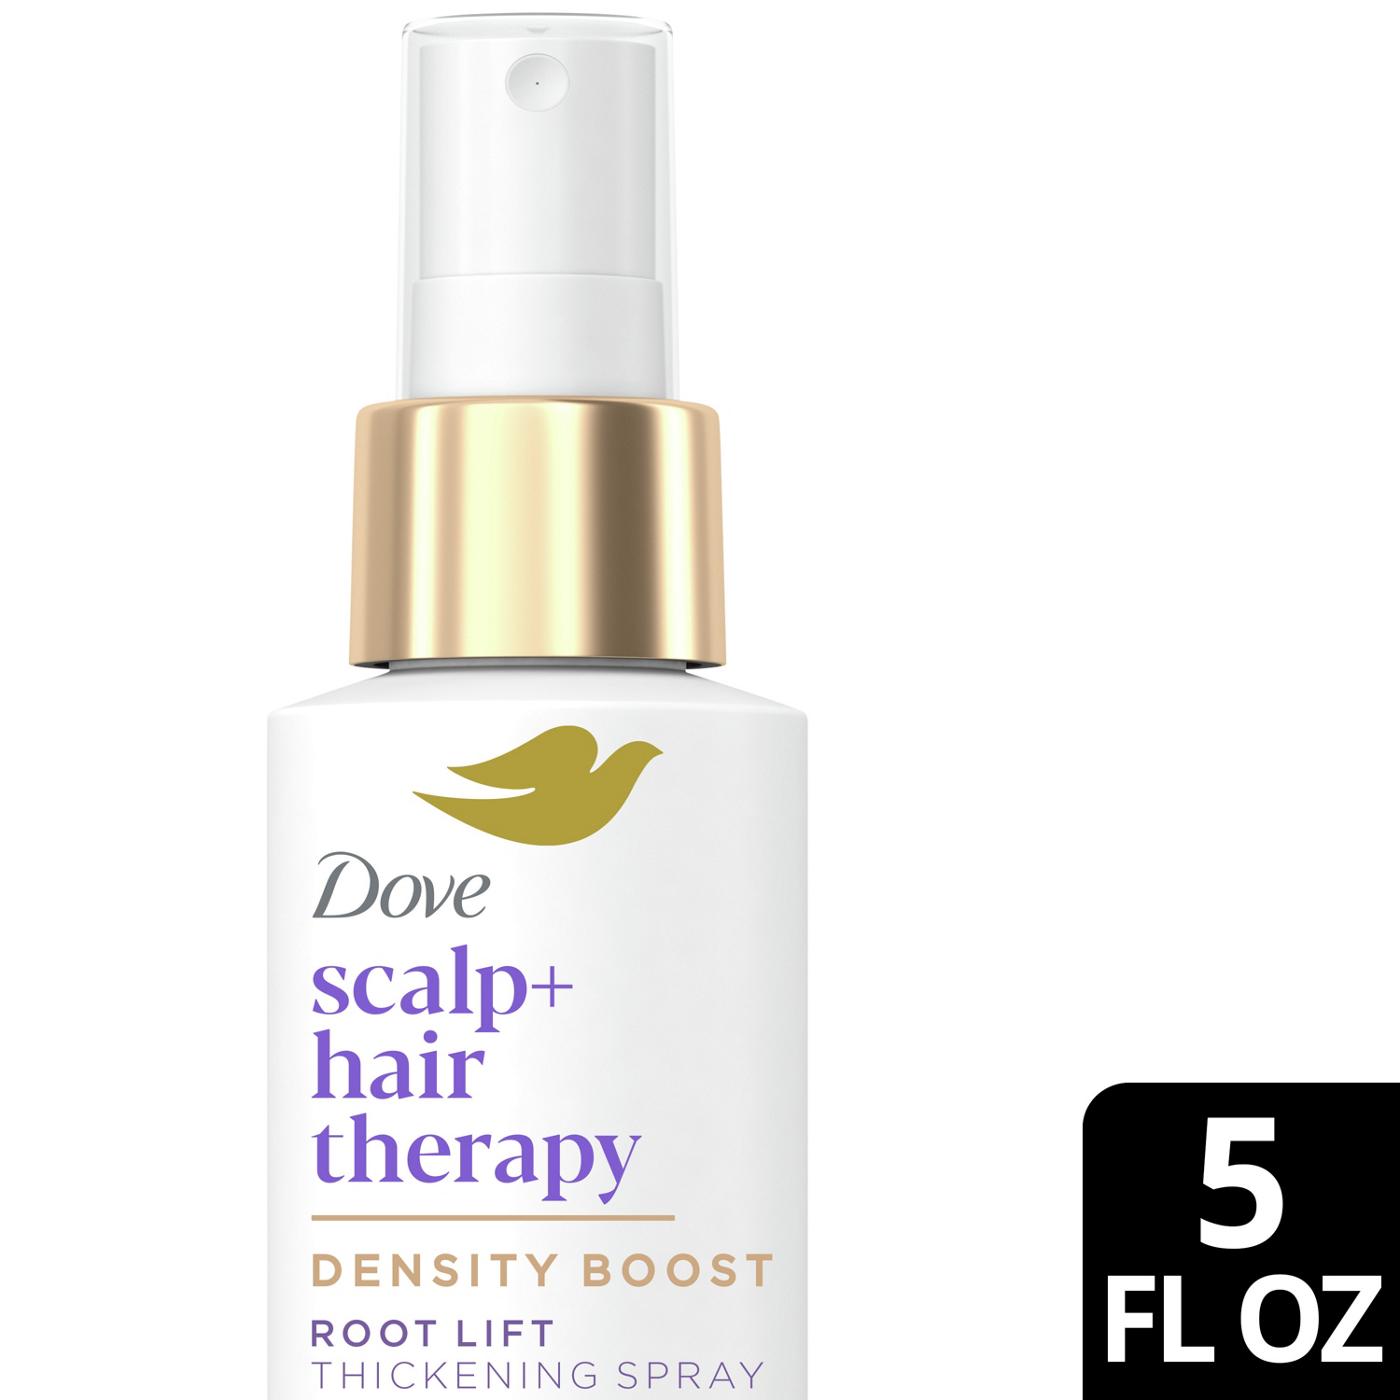 Dove Scalp+ Hair Therapy Thickening Spray; image 4 of 5